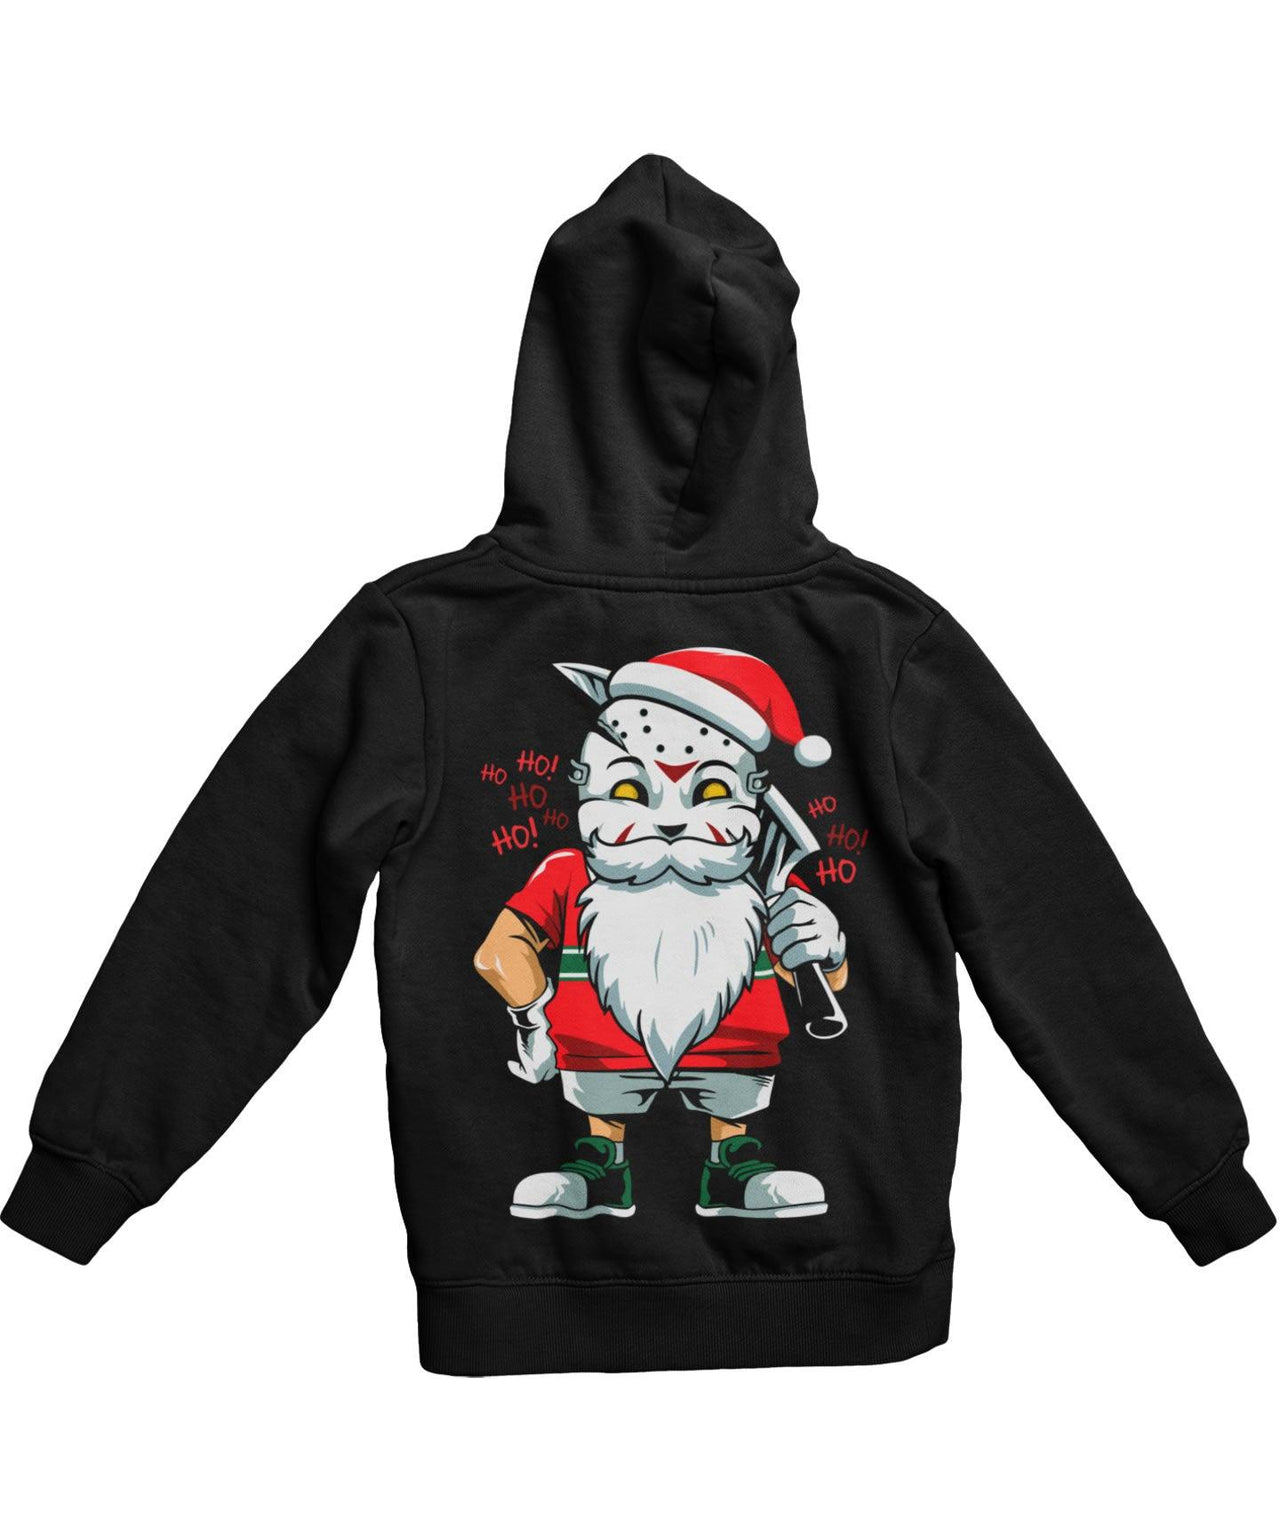 Another Evil Santa Back Printed Christmas Unisex Hoodie 8Ball